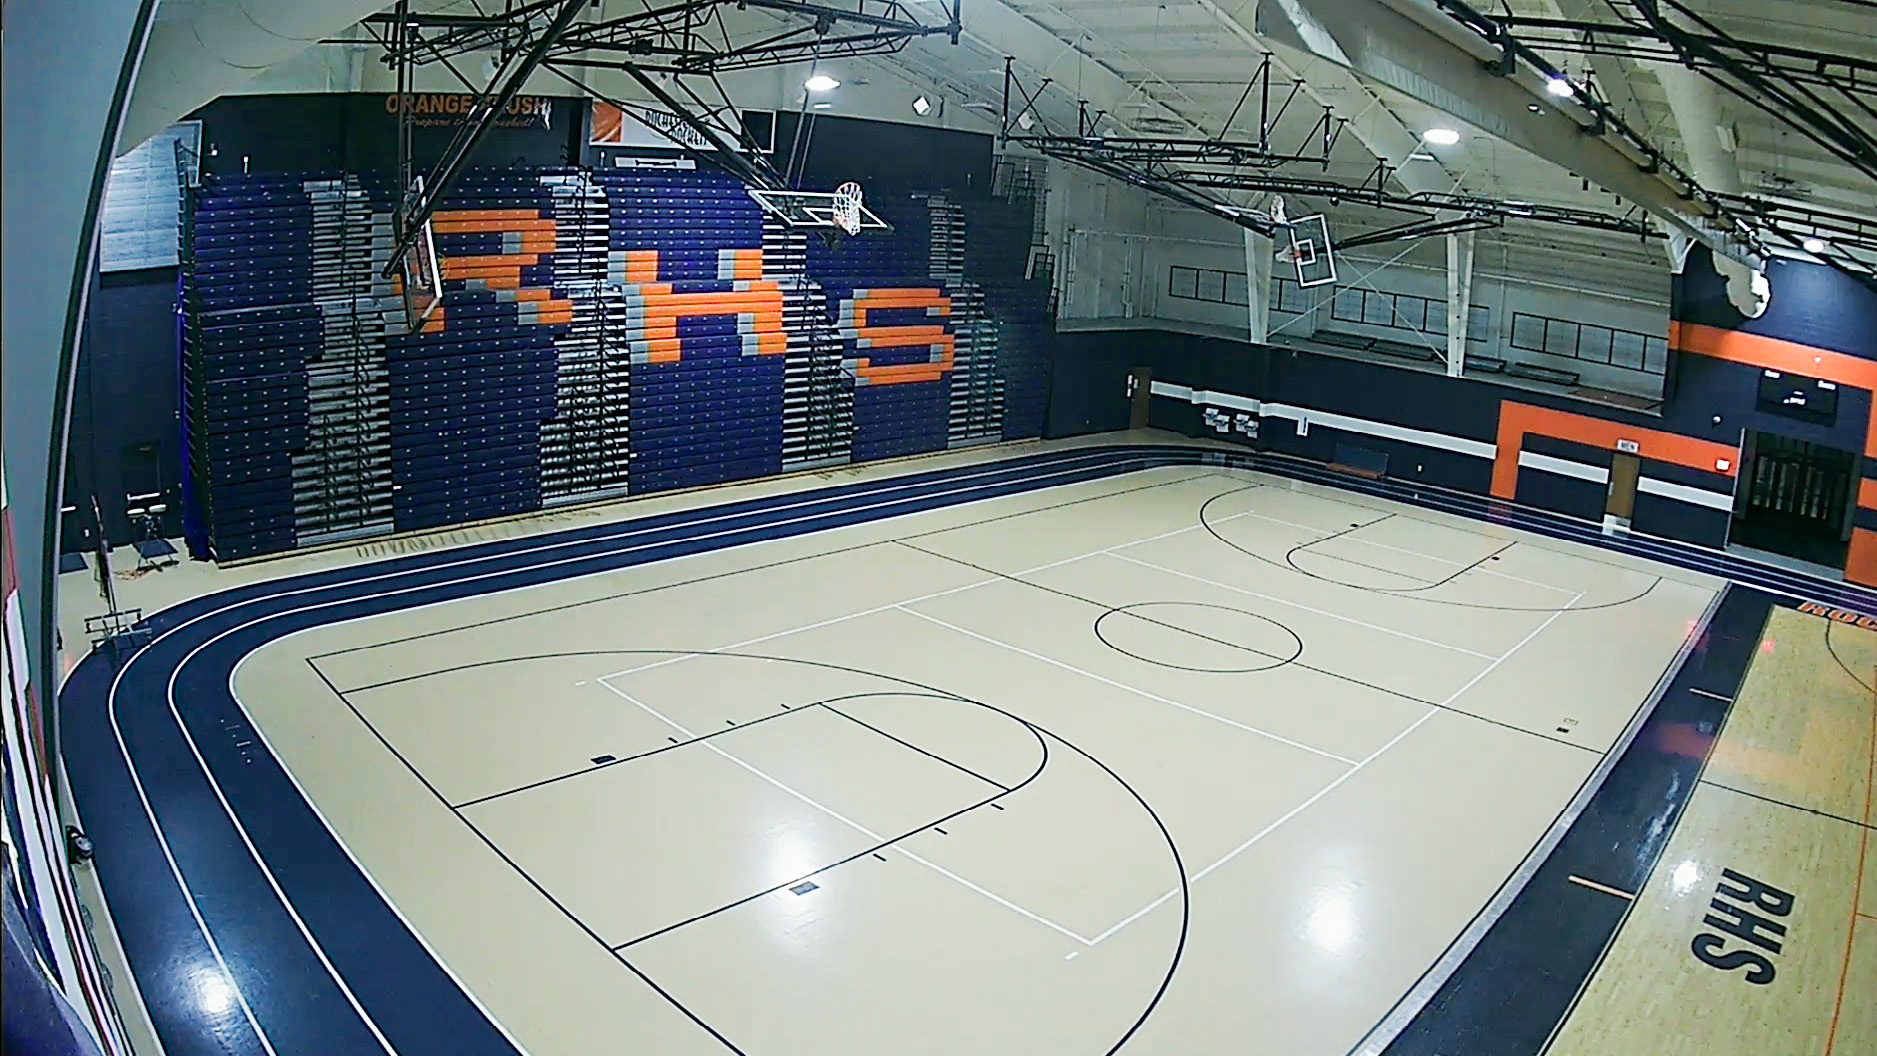 An Illinois gym shown after camera upgrades by Thompson Electronics Company